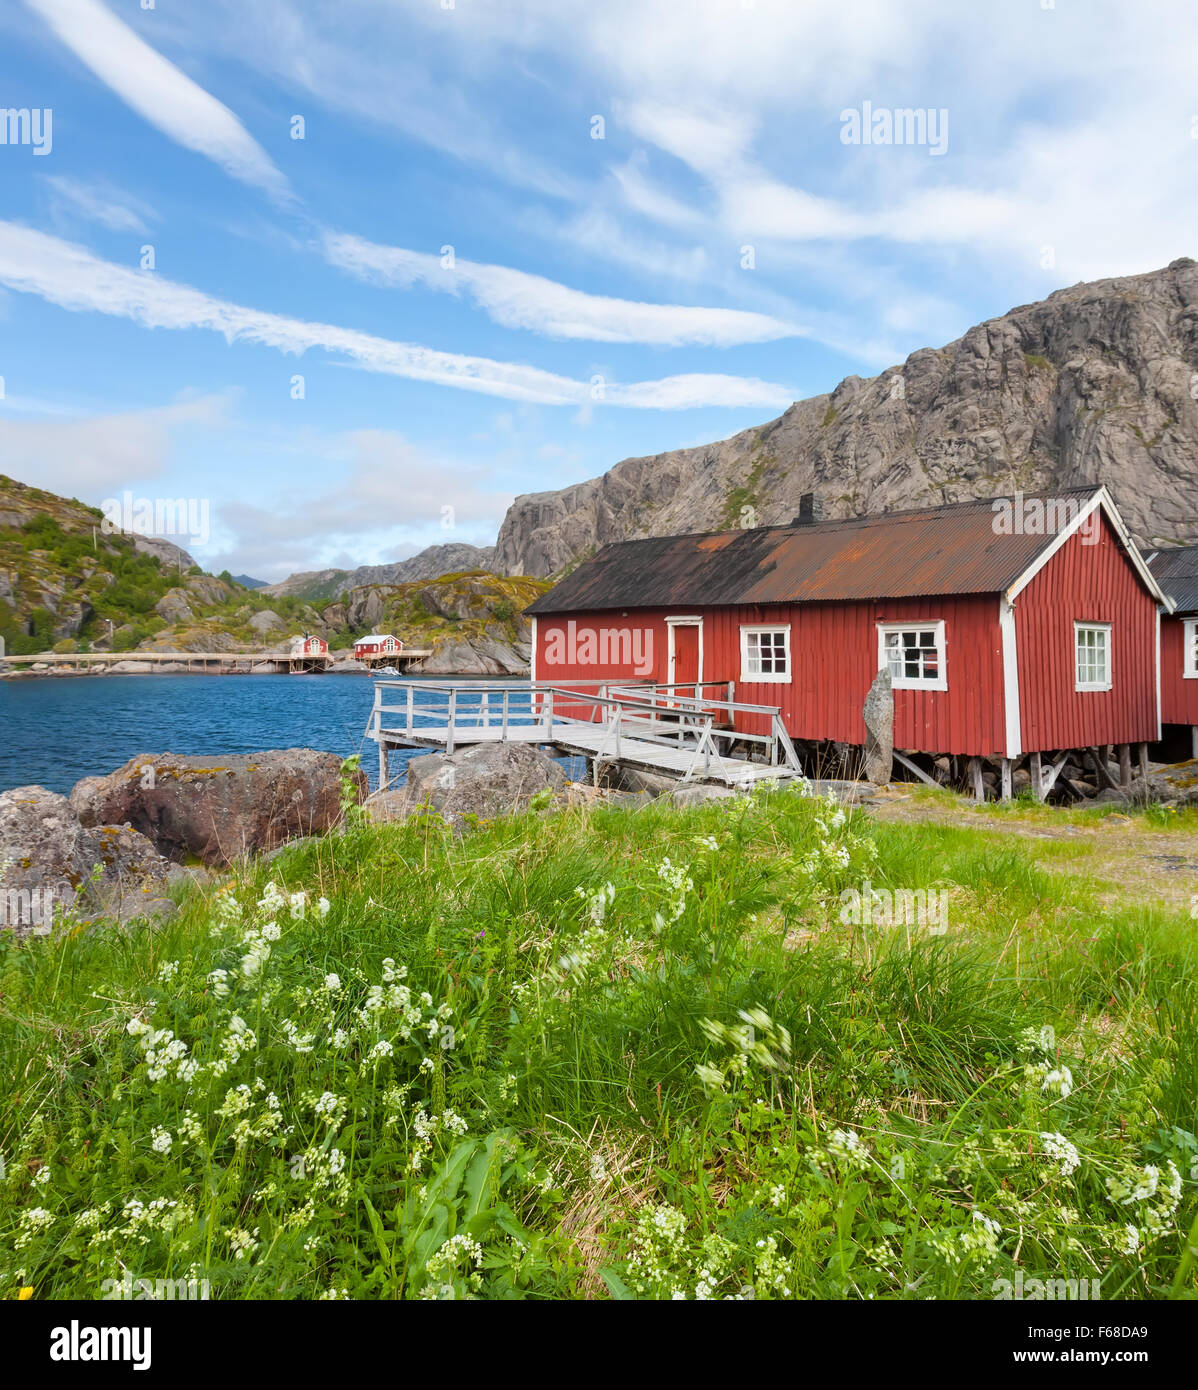 Typical red rorbu fishing hut in town of Svolvaer on Lofoten islands in Norway lit by midnight sun Stock Photo